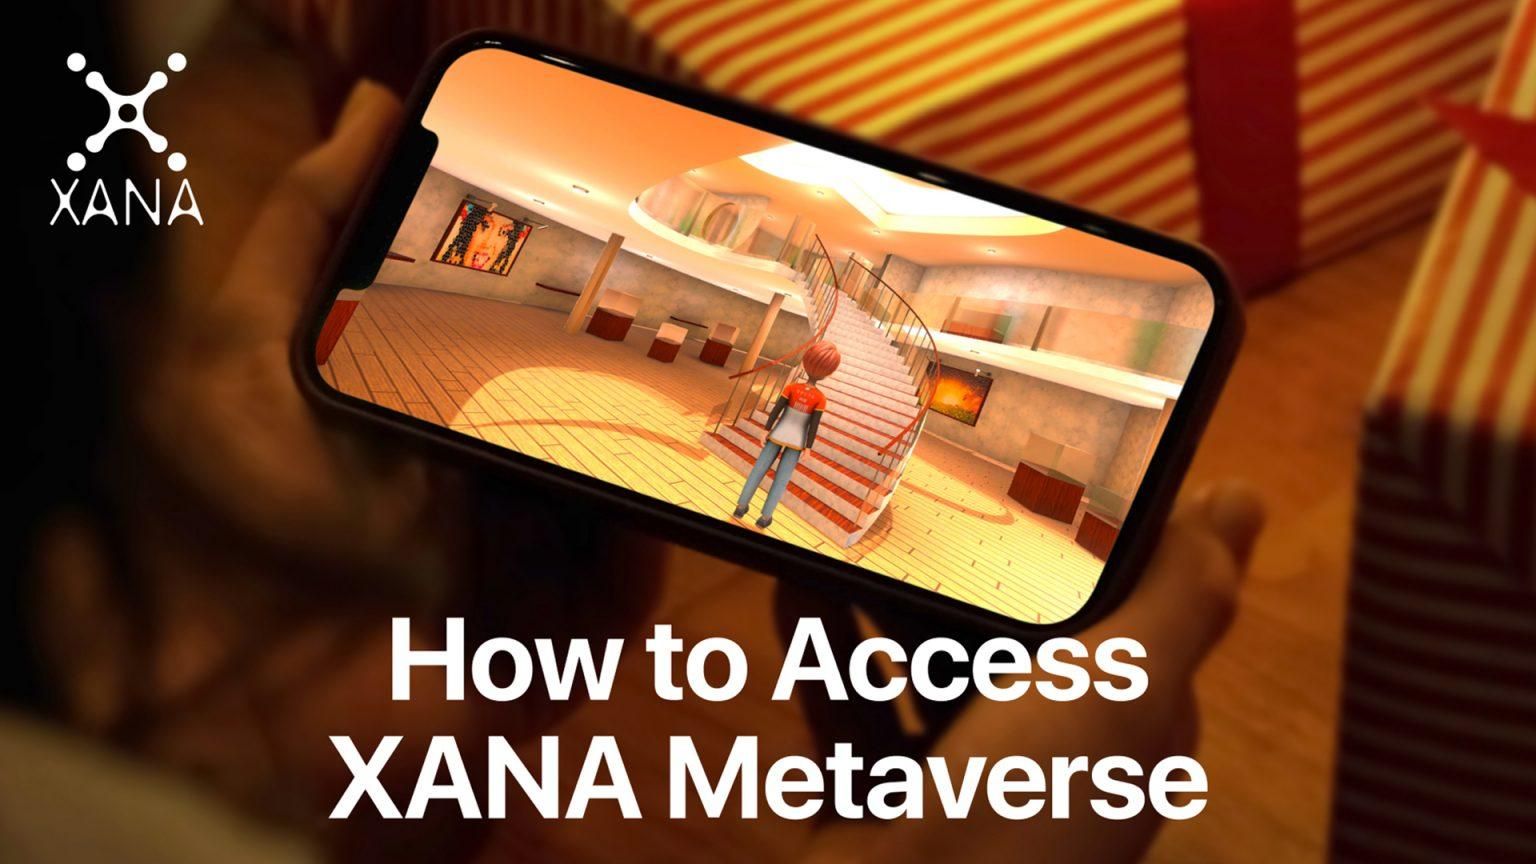 The Metaverse: What Is It and How Can I Get Into It?